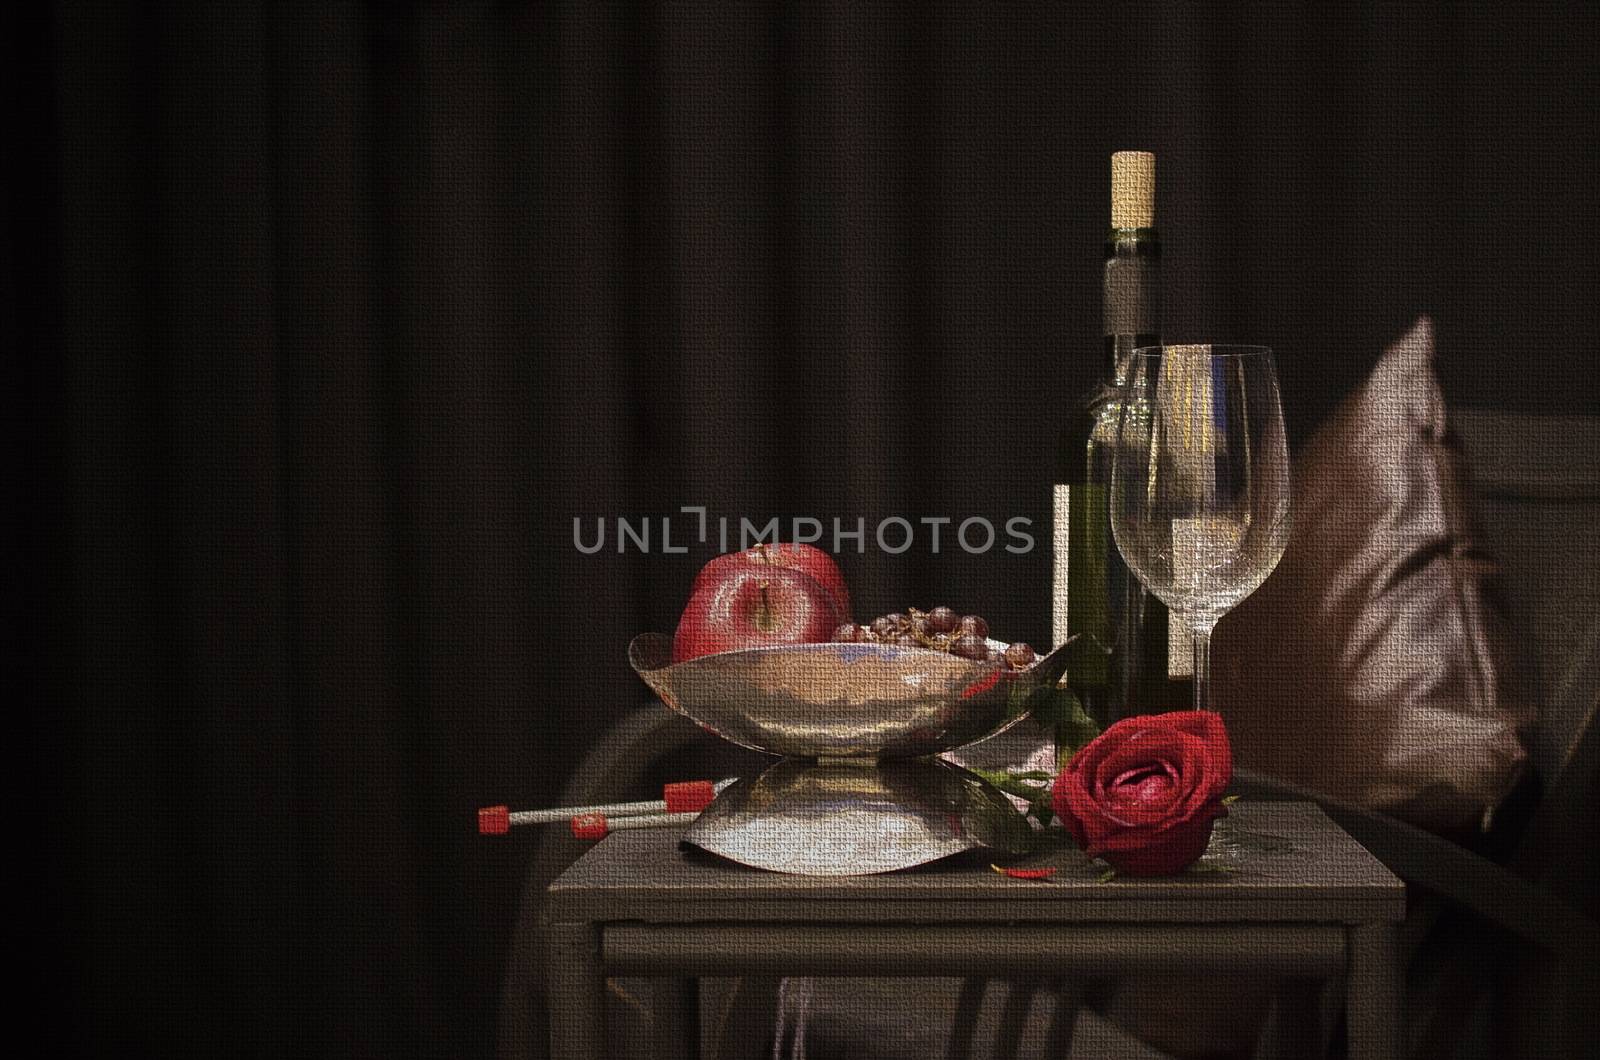 Still life image of wine, fruits and yarn on canvas background